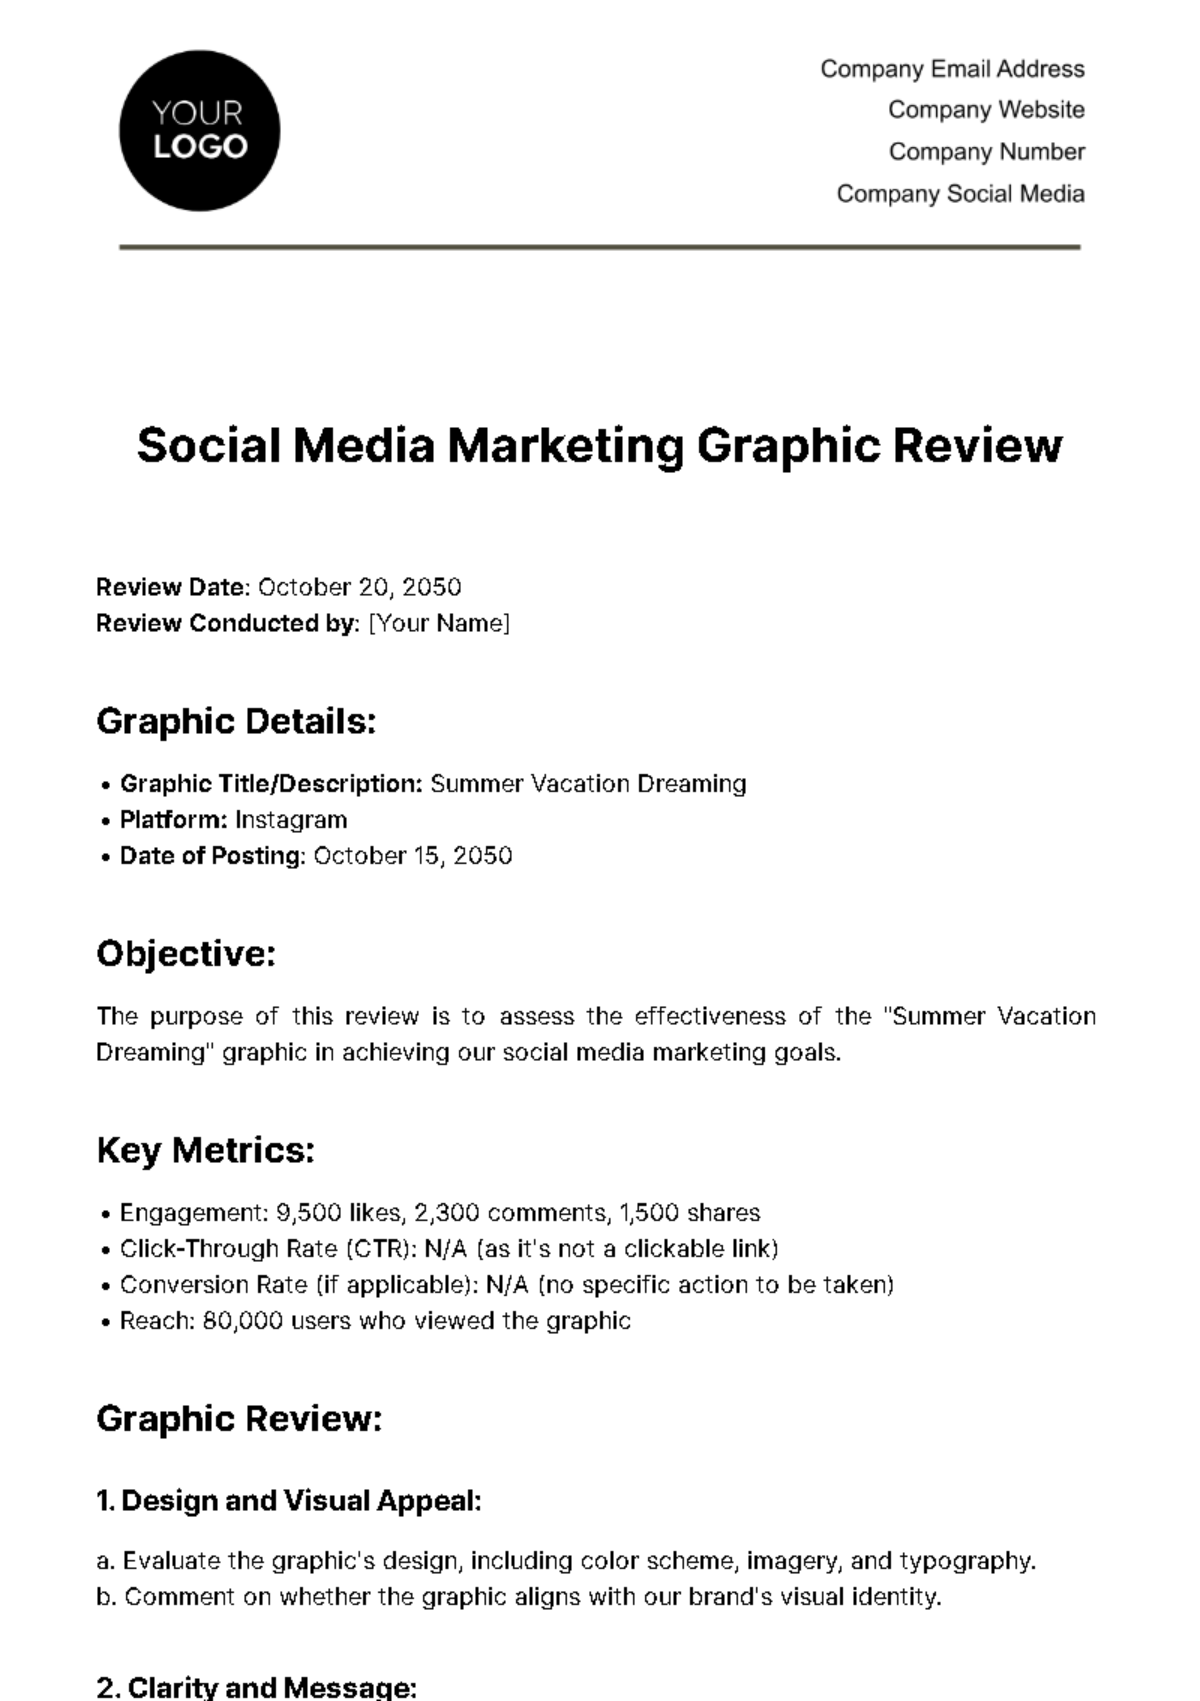 Social Media Marketing Graphic Review Template